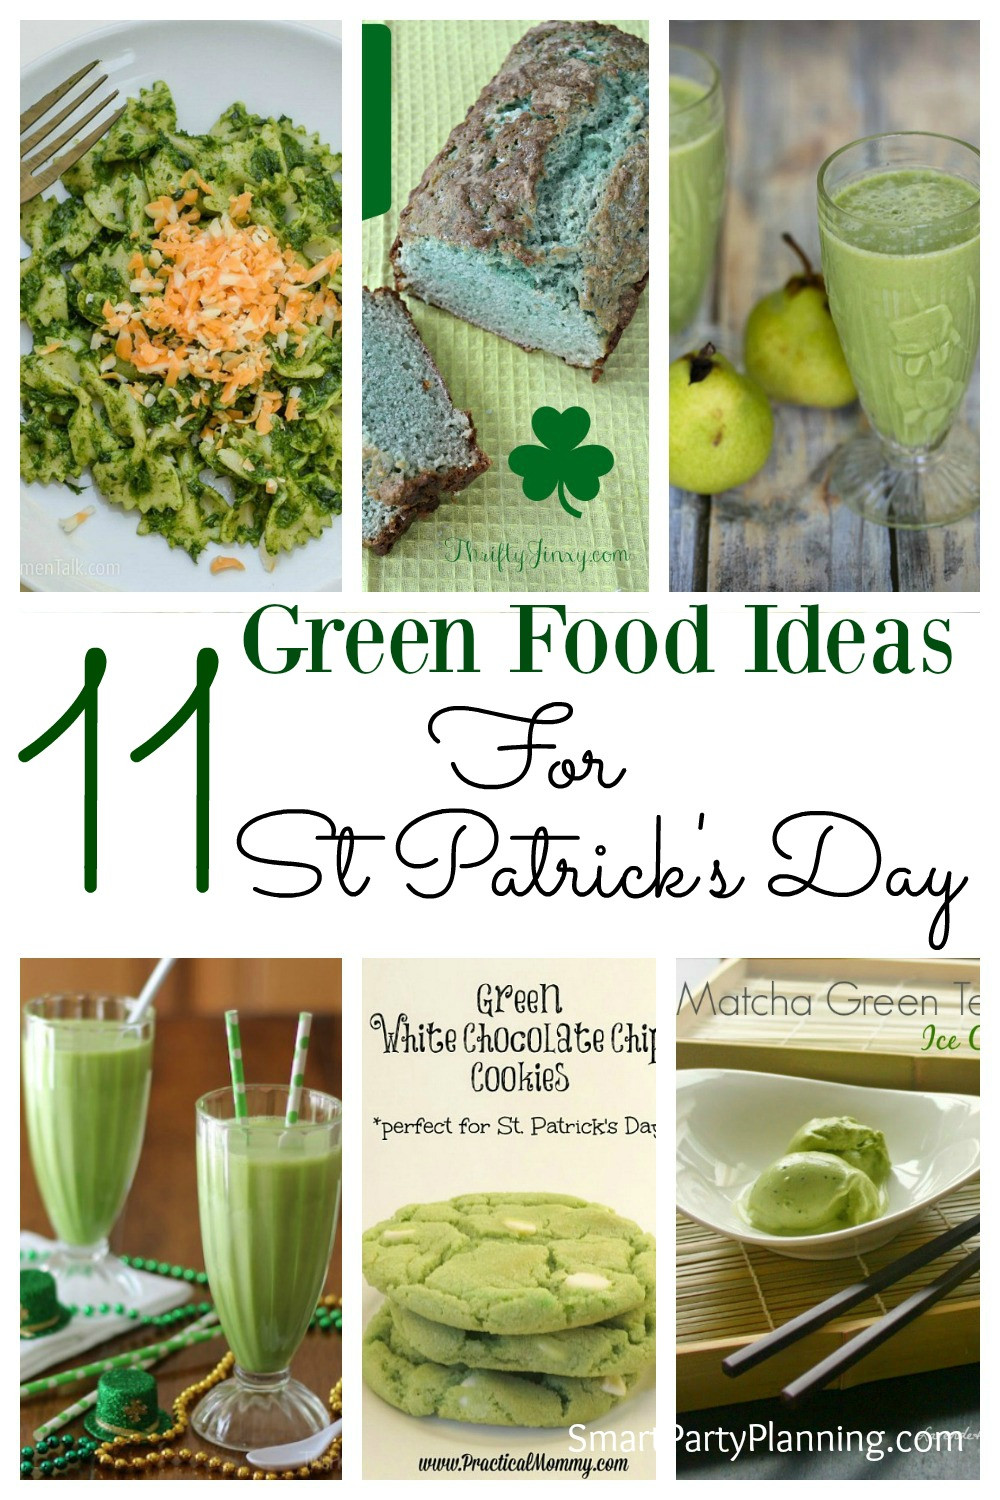 Saint Patrick's Day Food Ideas
 11 Green Food Ideas For St Patrick s Day